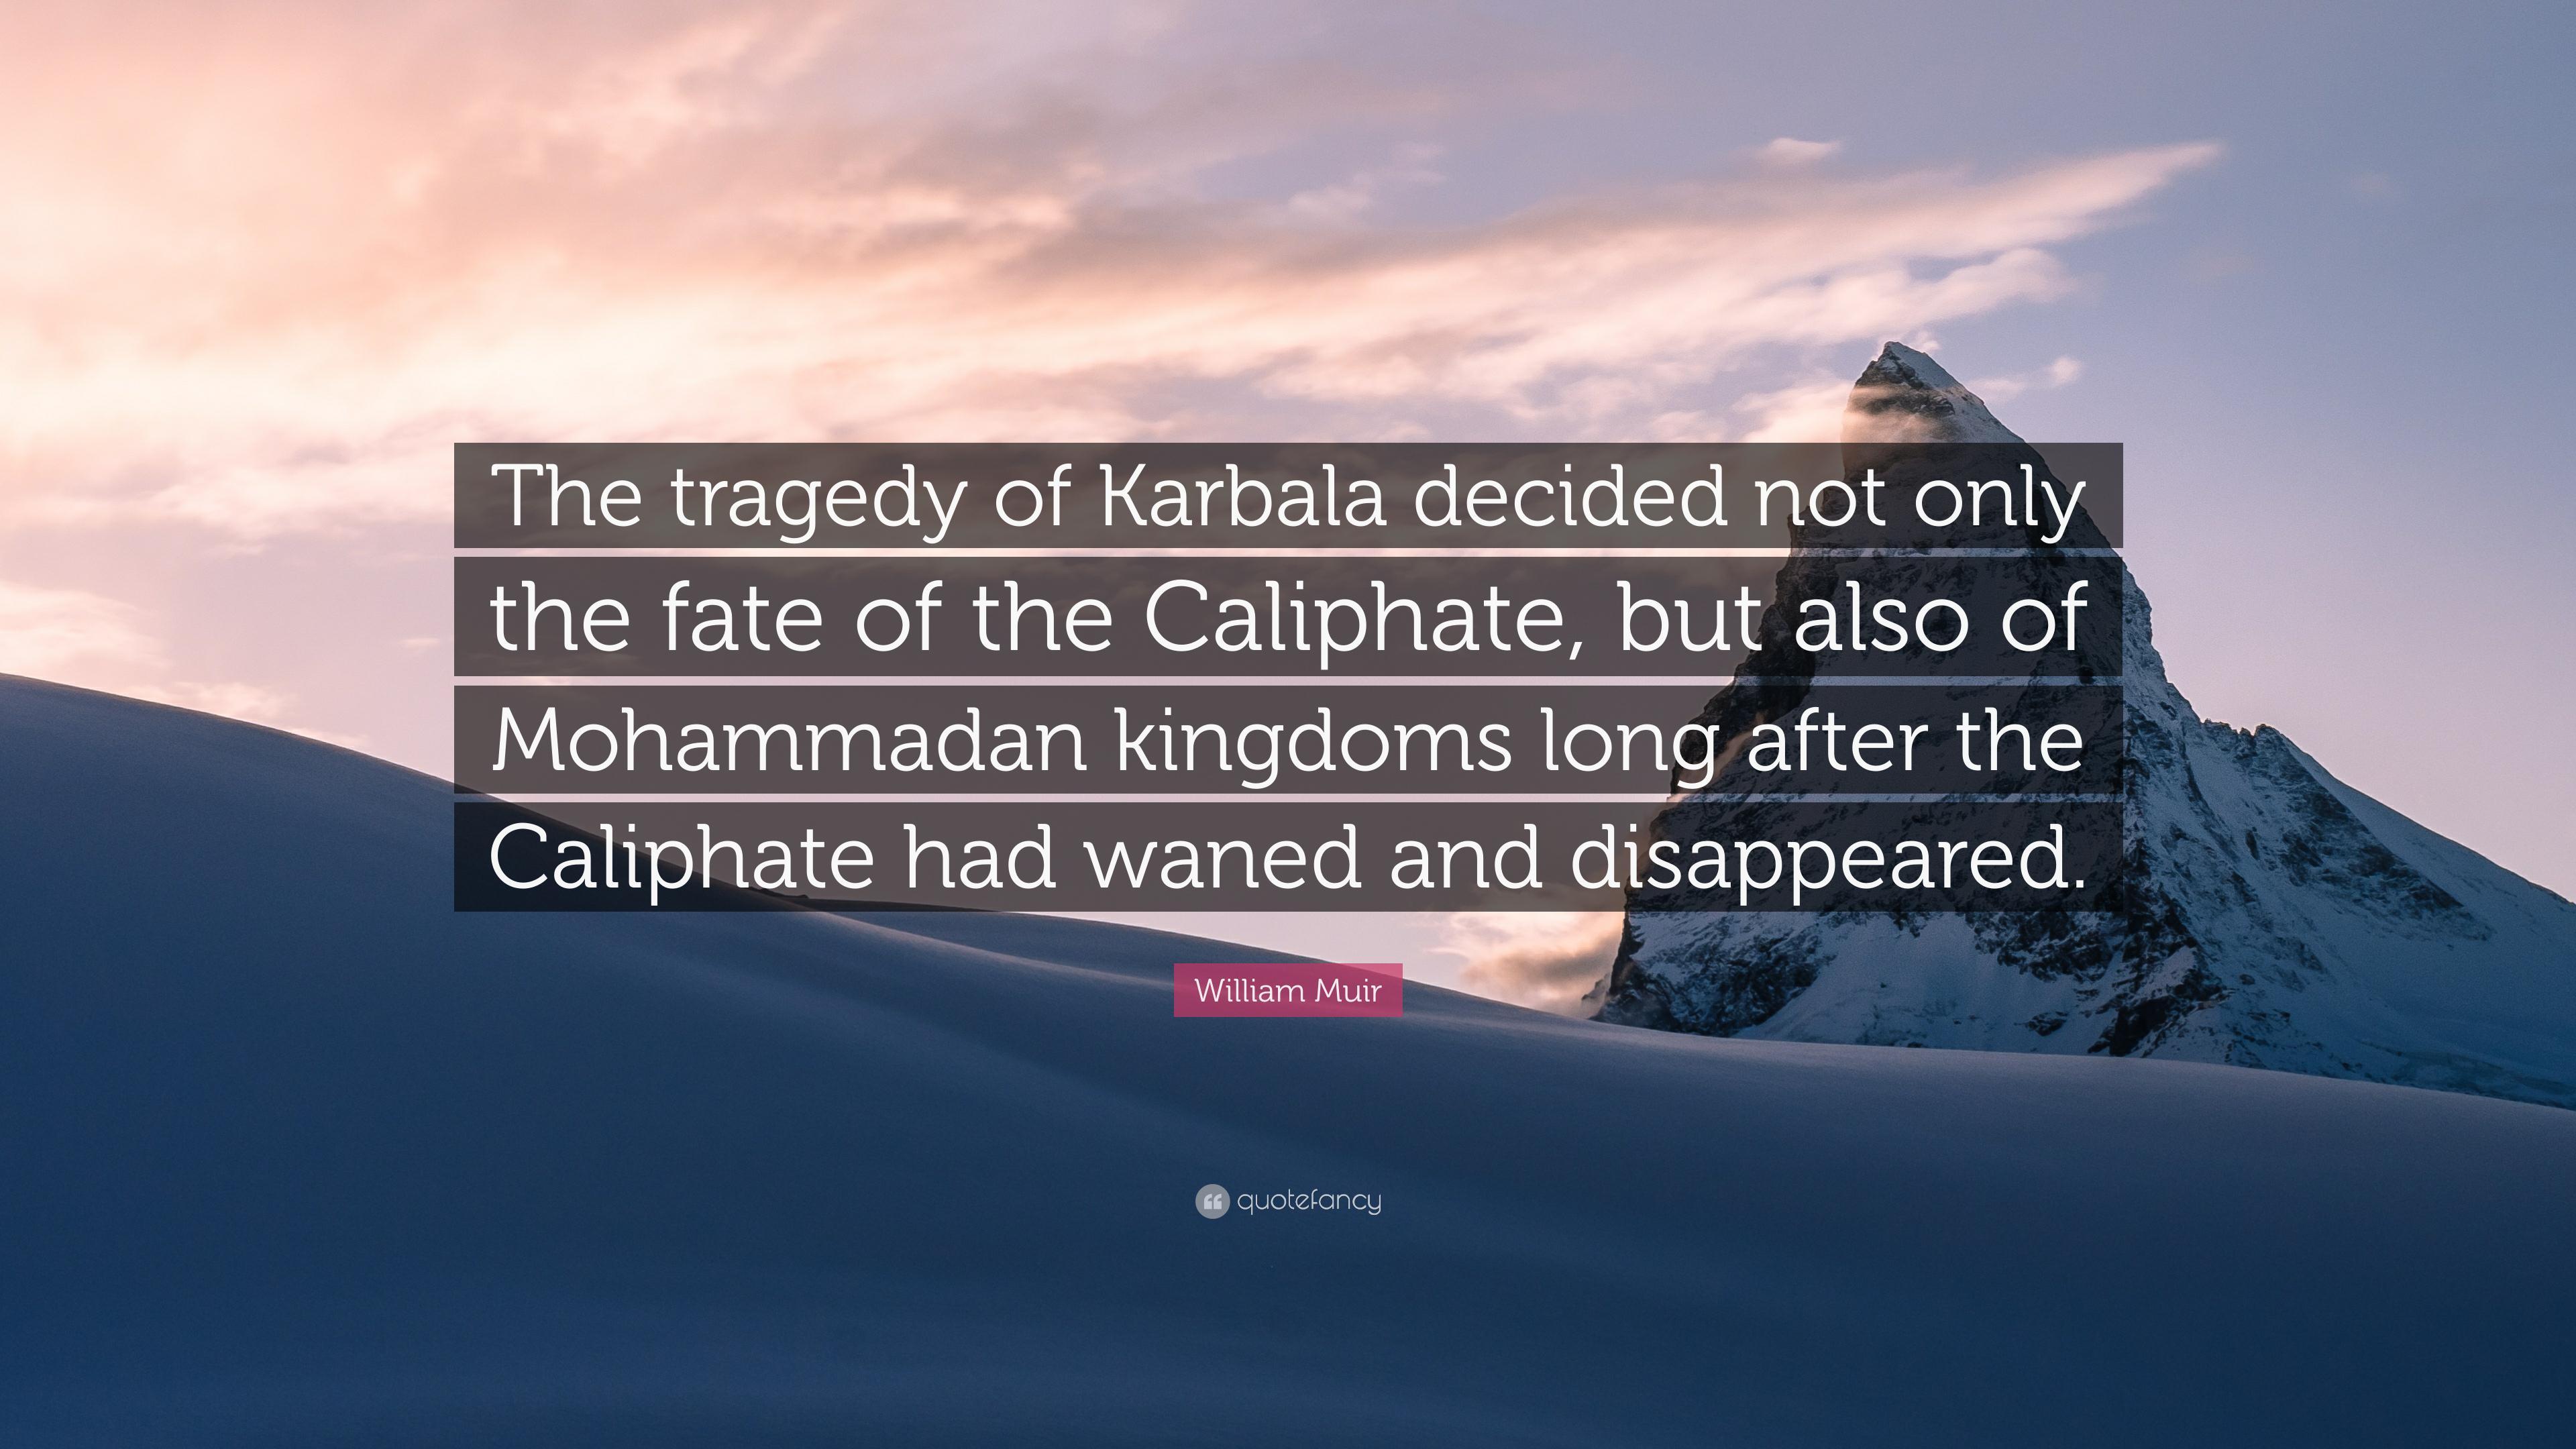 William Muir Quote: “The tragedy of Karbala decided not only